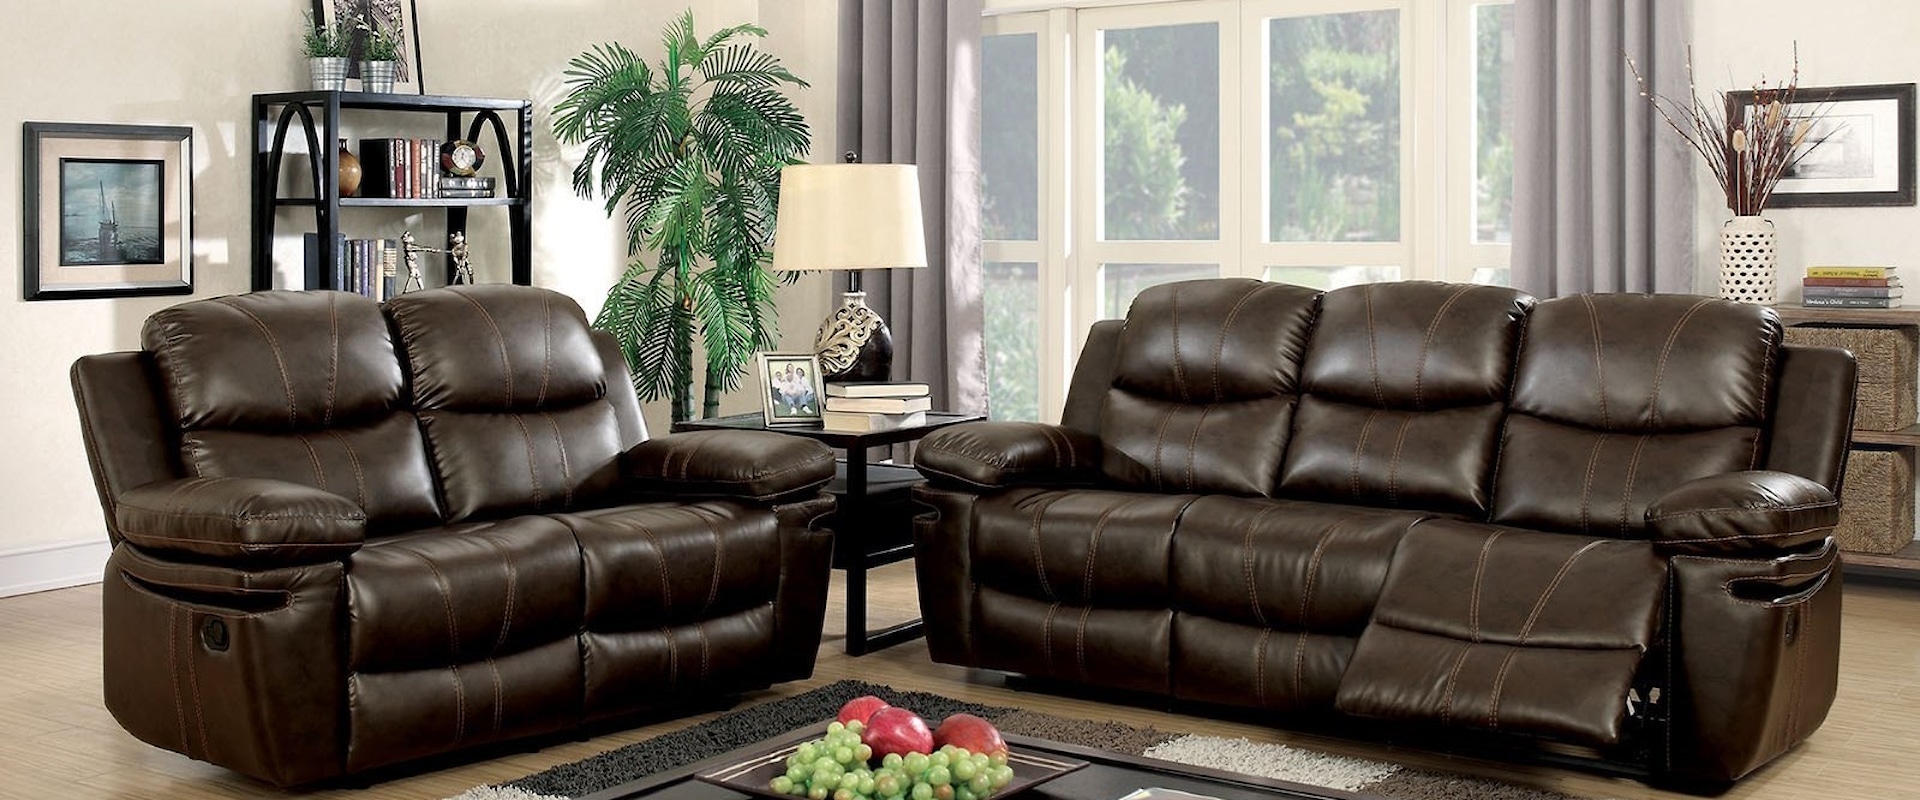 Transitional Reclining Sofa and Loveseat Set with Plush Cushions